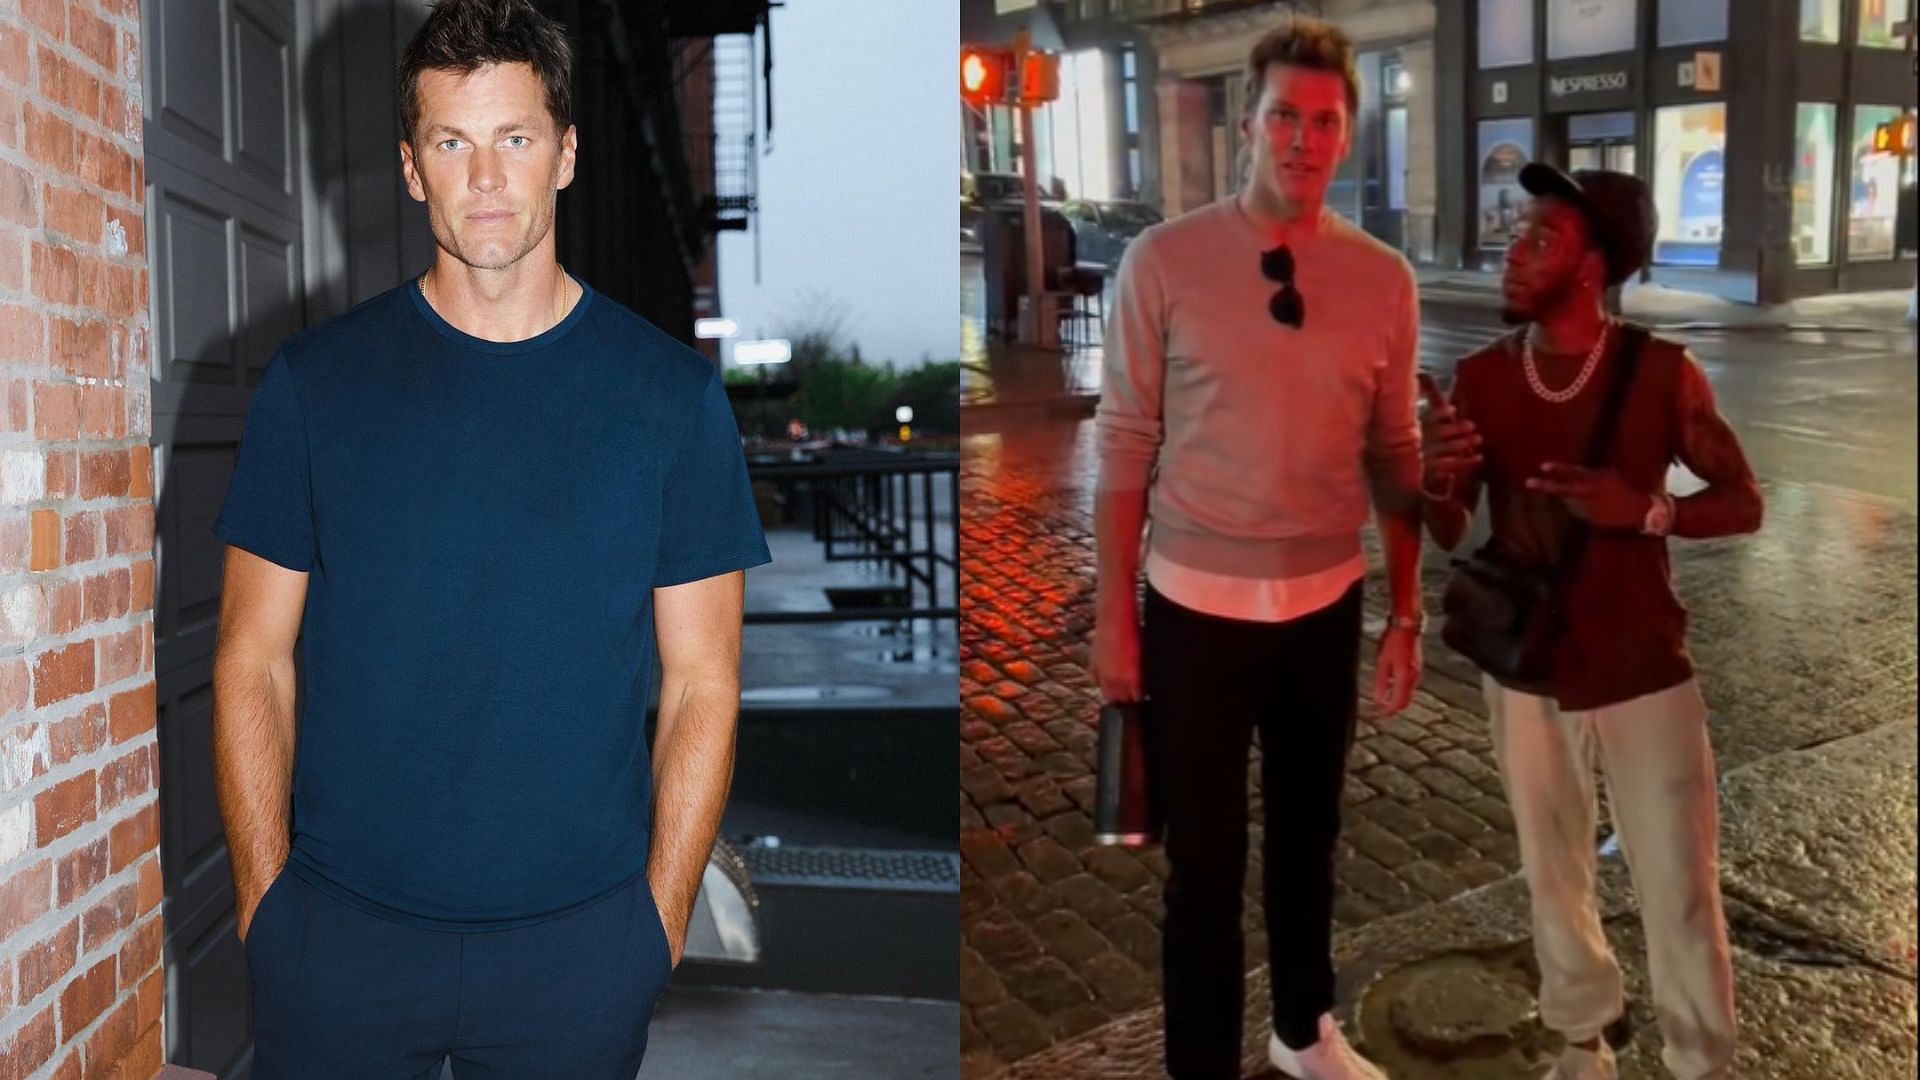 Fans think Tom Brady looks too good to be true.